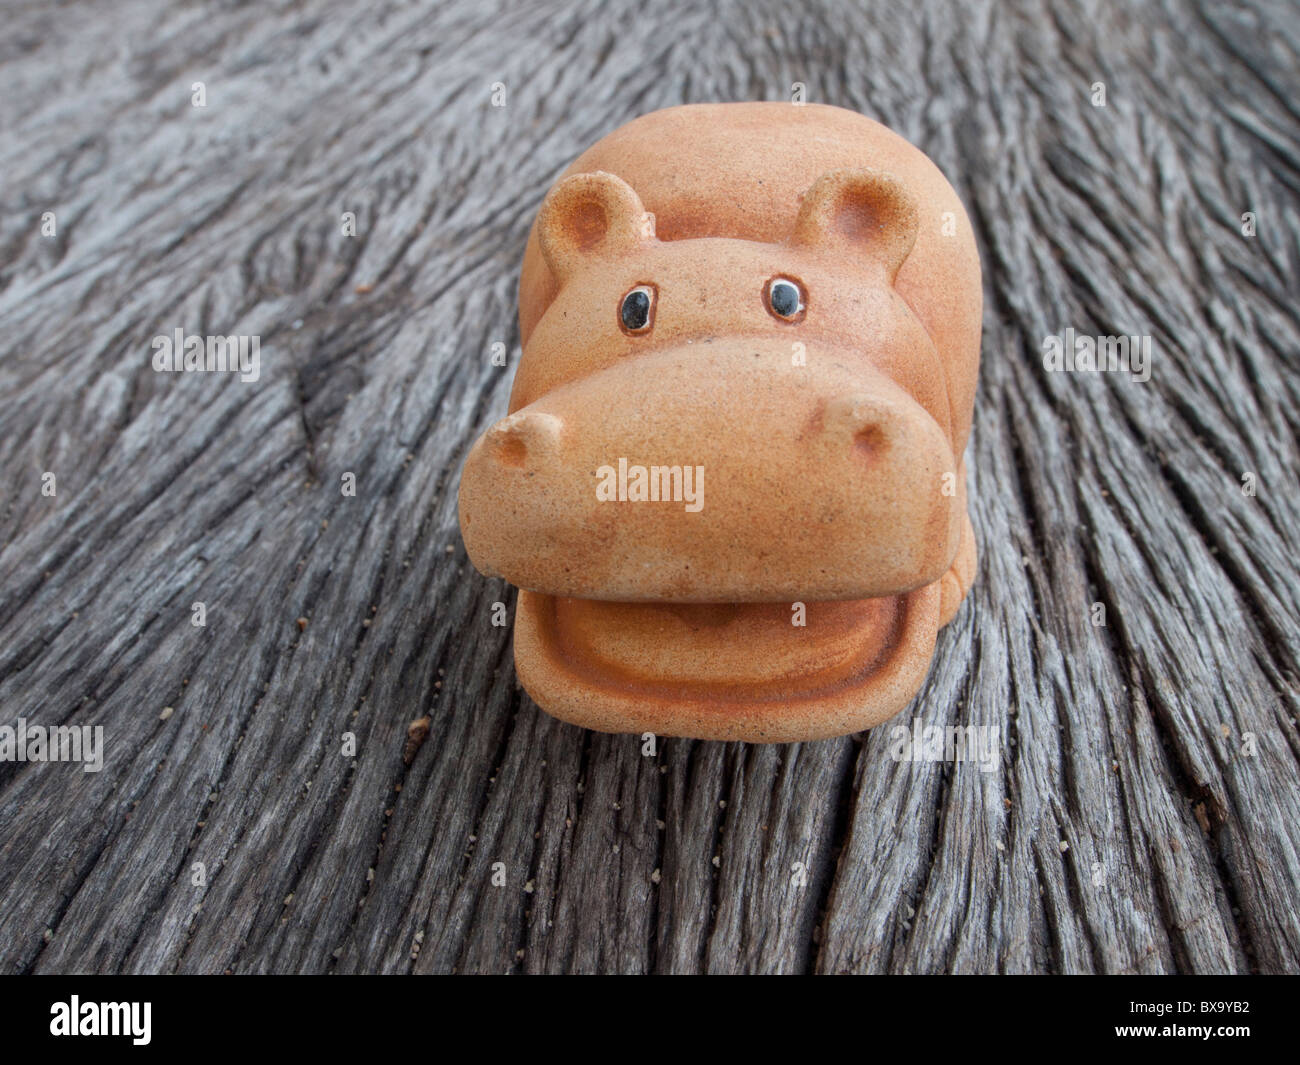 The hippopotamus Pottery for garden decoration sit on the old wood table Stock Photo